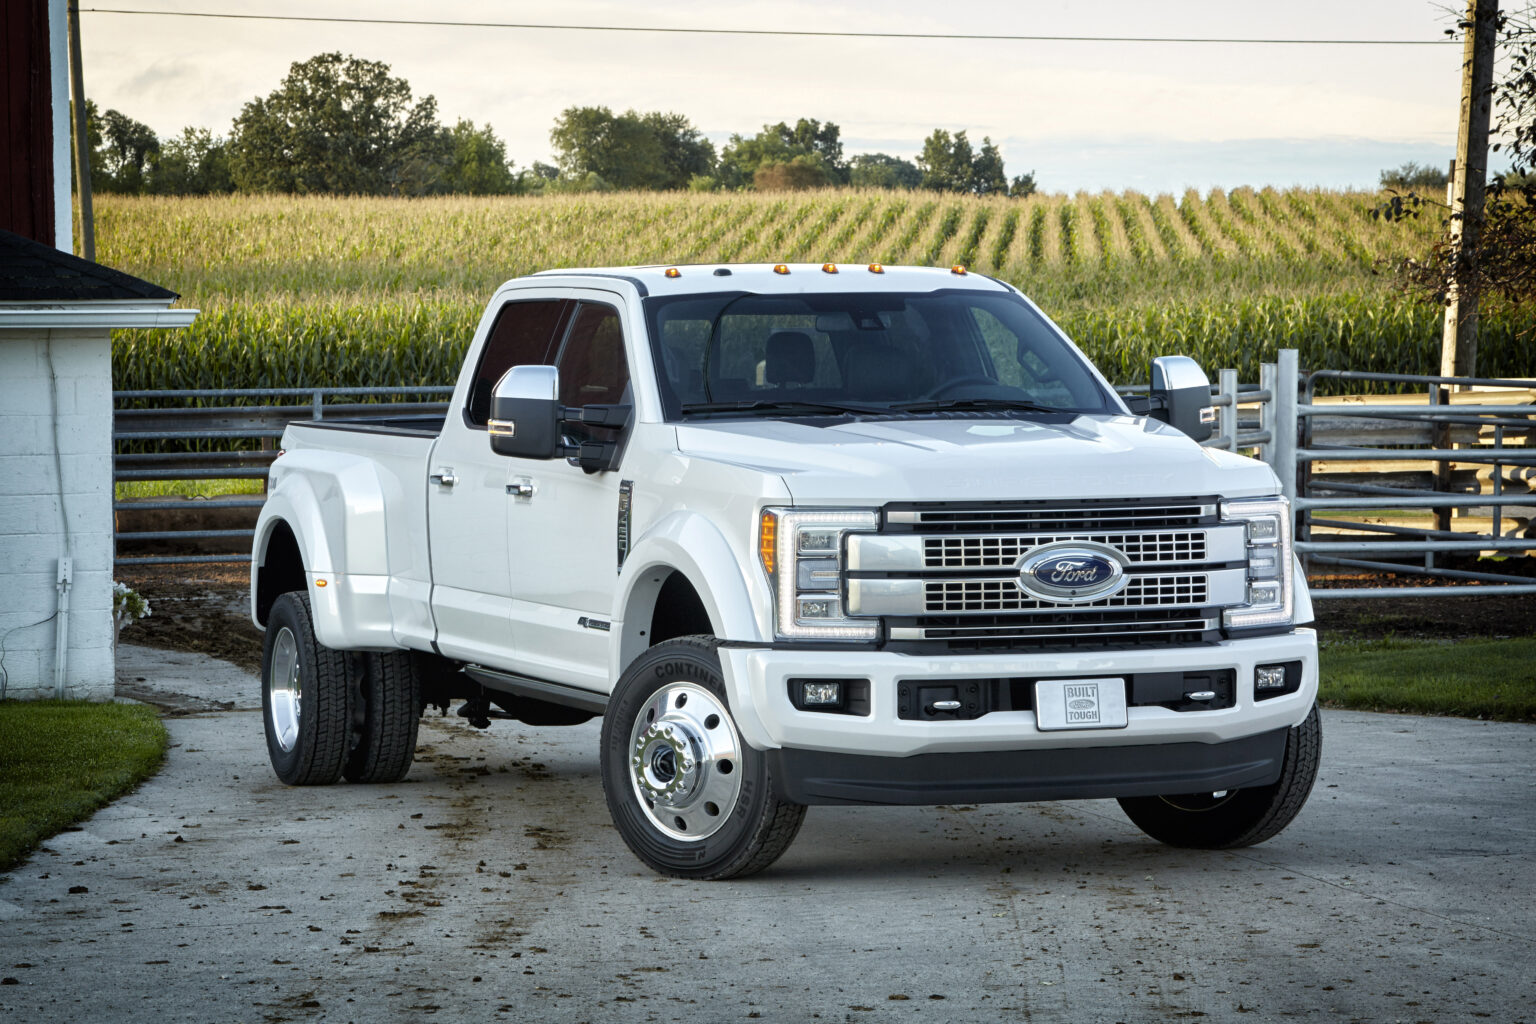 All-new 2017 Ford F-450 Super Duty Platinum Crew Cab 4x4 Class 3 dual-rear-wheel pickup is the top-of-the-line luxury model and tow boss of the lineup. It can pull heavier gooseneck and fifth-wheel trailers than ever.